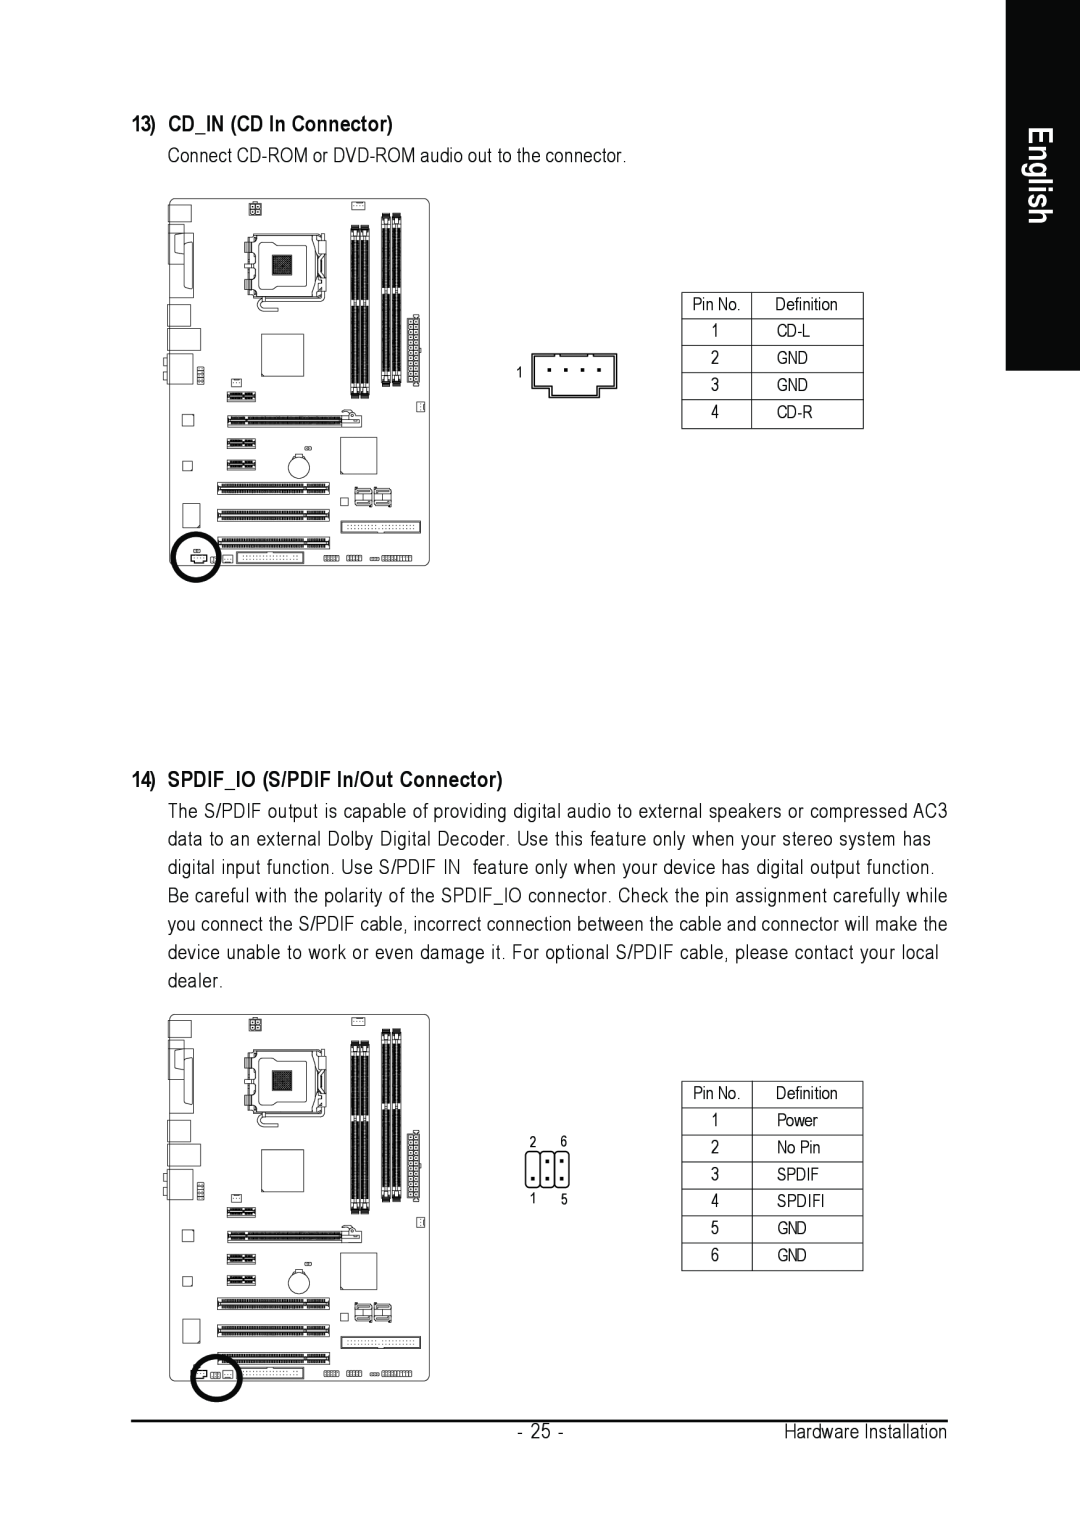 Intel GA-945PL-DS3P, GA-945PL-S3P user manual CDIN CD In Connector, SPDIFIO S/PDIF In/Out Connector, English 